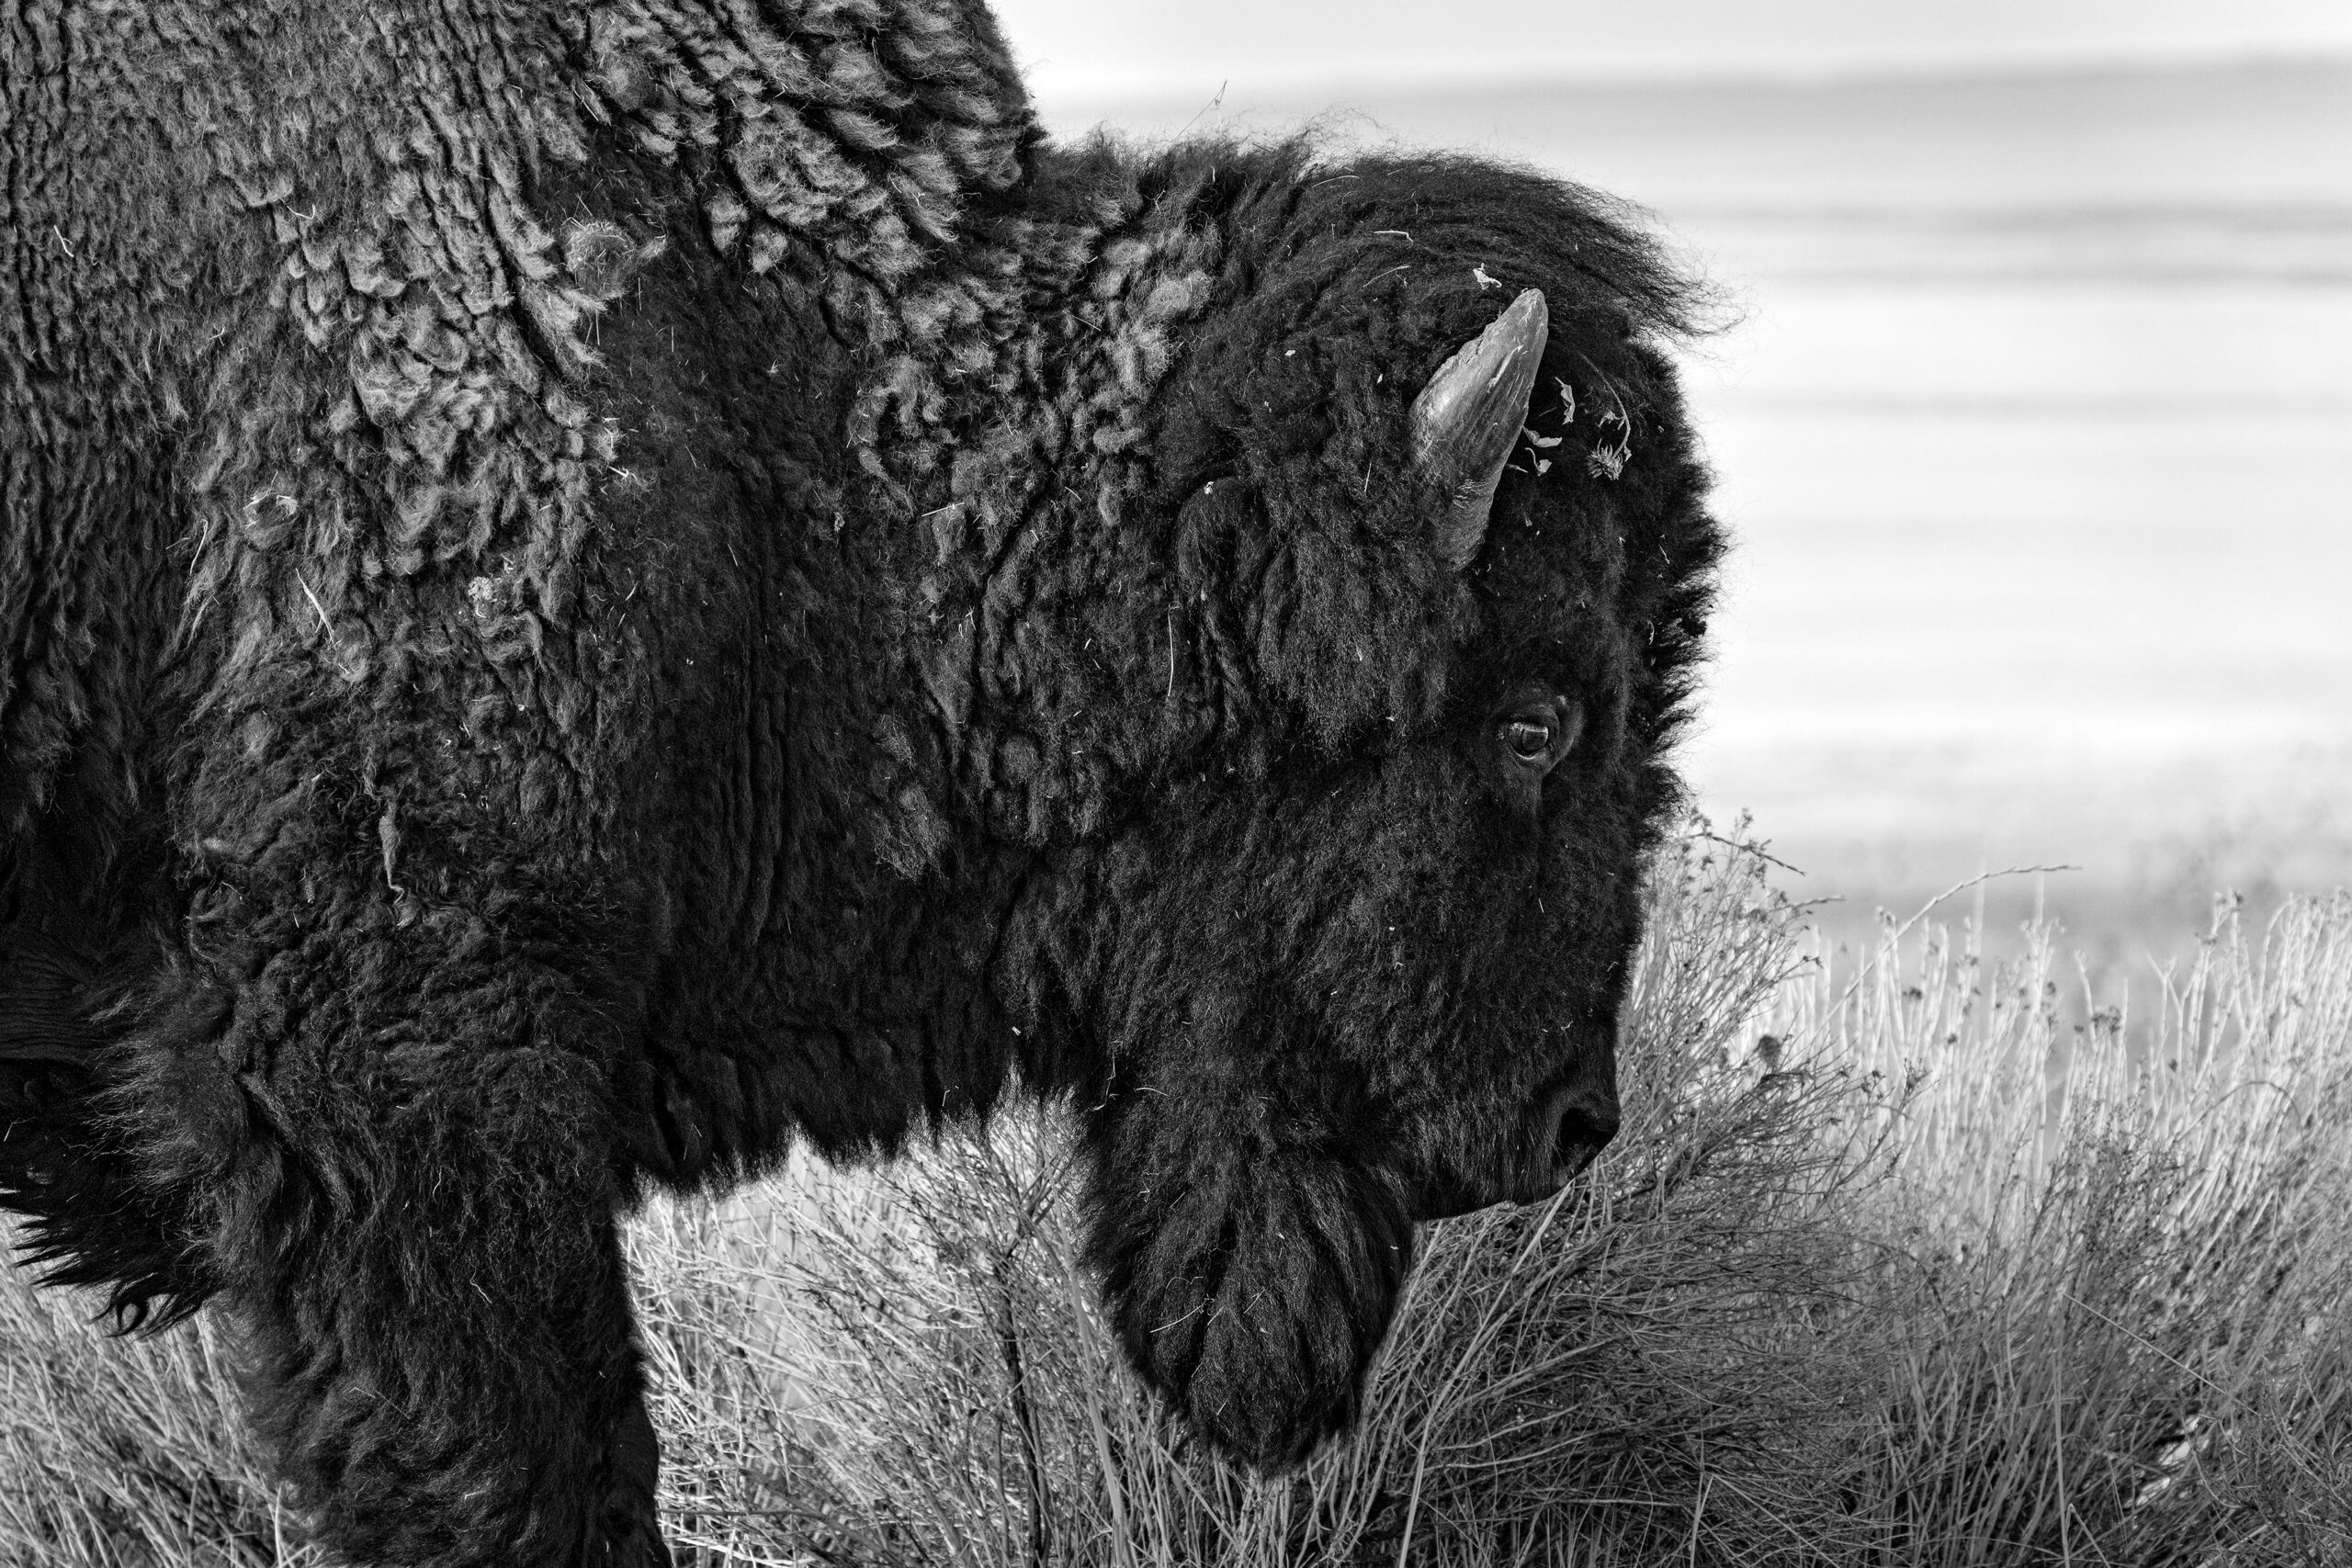 A bison on Antelope Island.